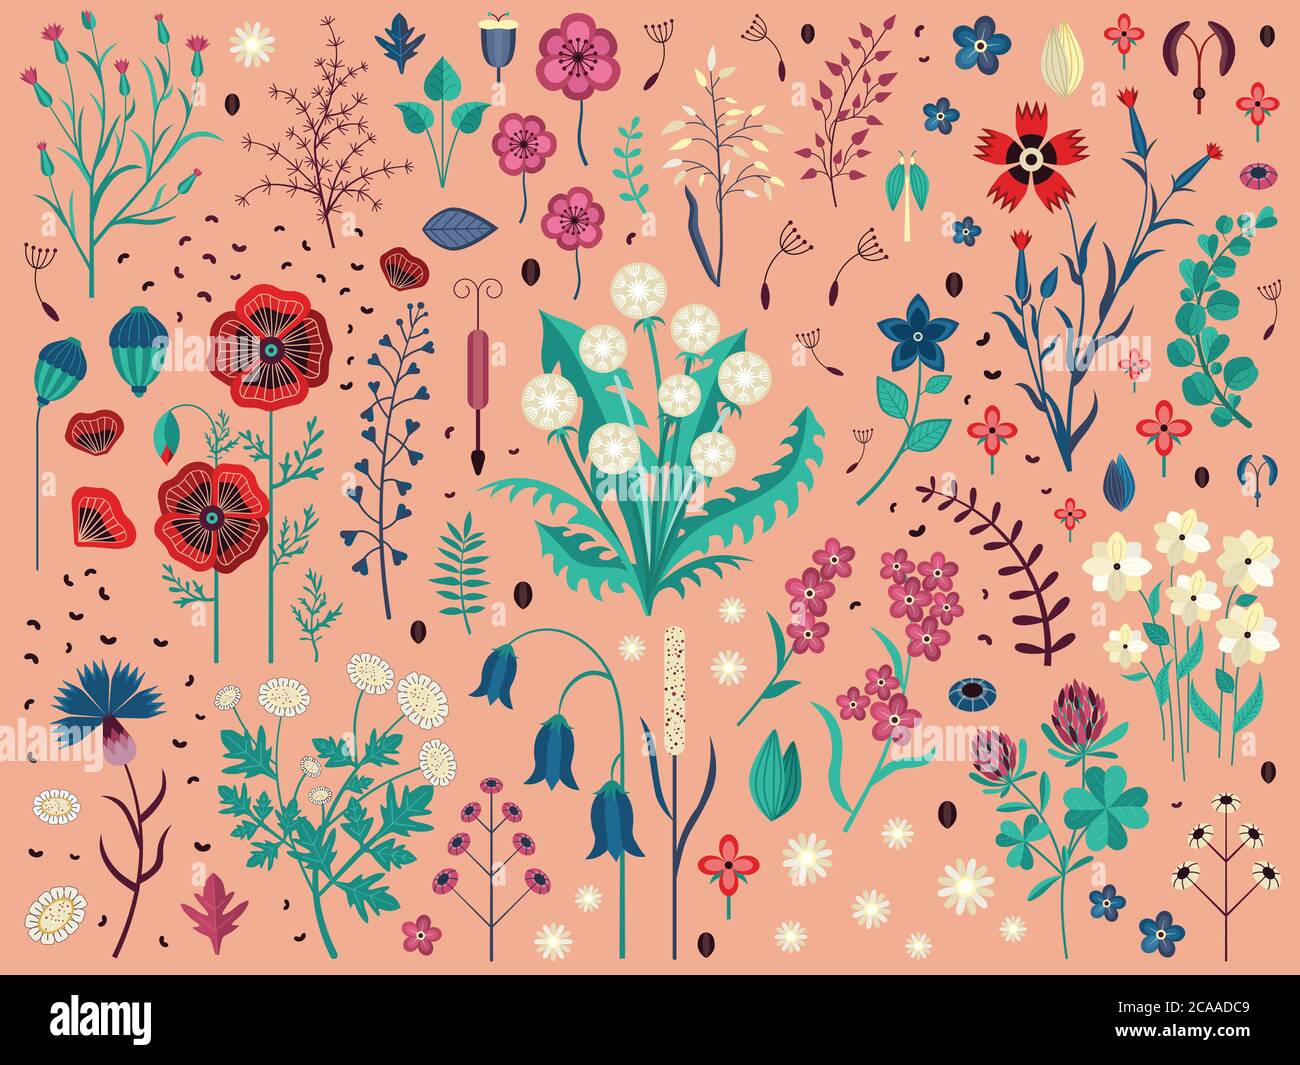 Wild Flowers Herbs and Field Plants Set Stock Vector